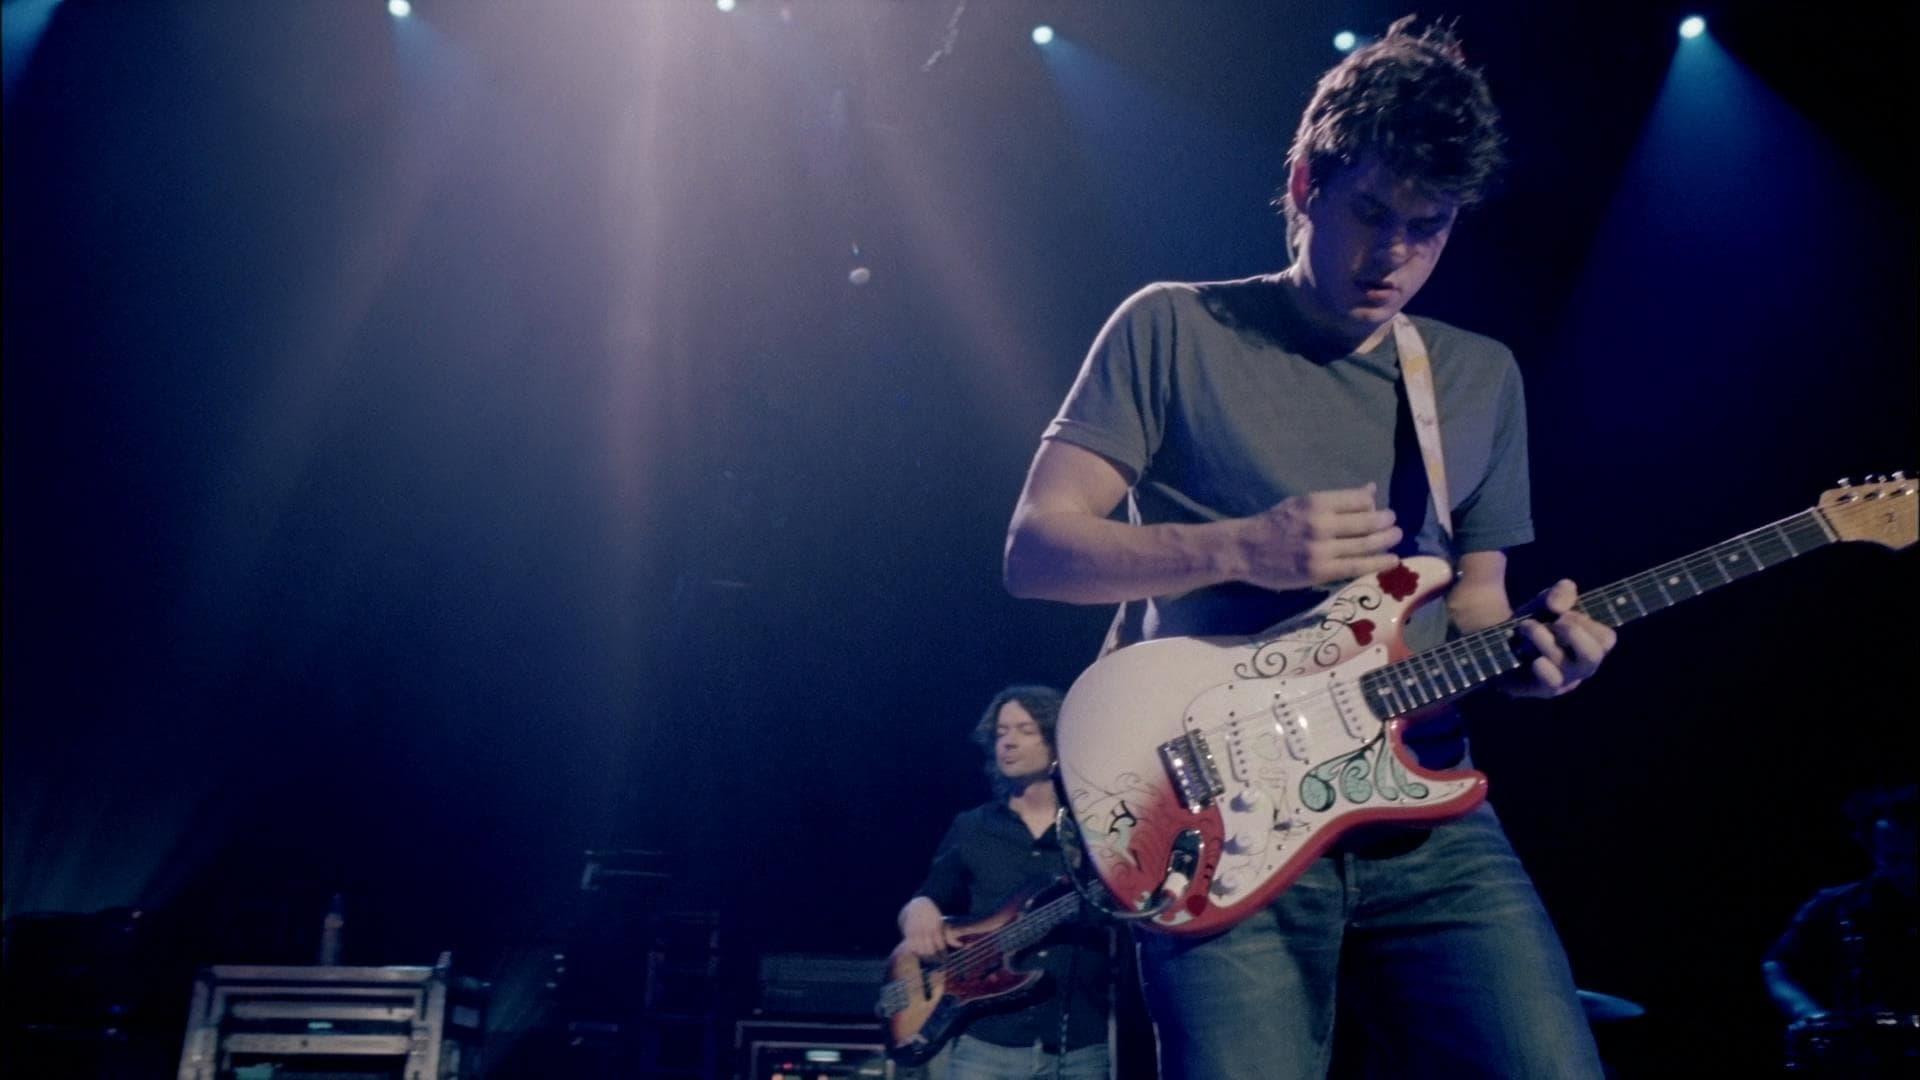 John Mayer: Where the Light Is (Live in Los Angeles) backdrop